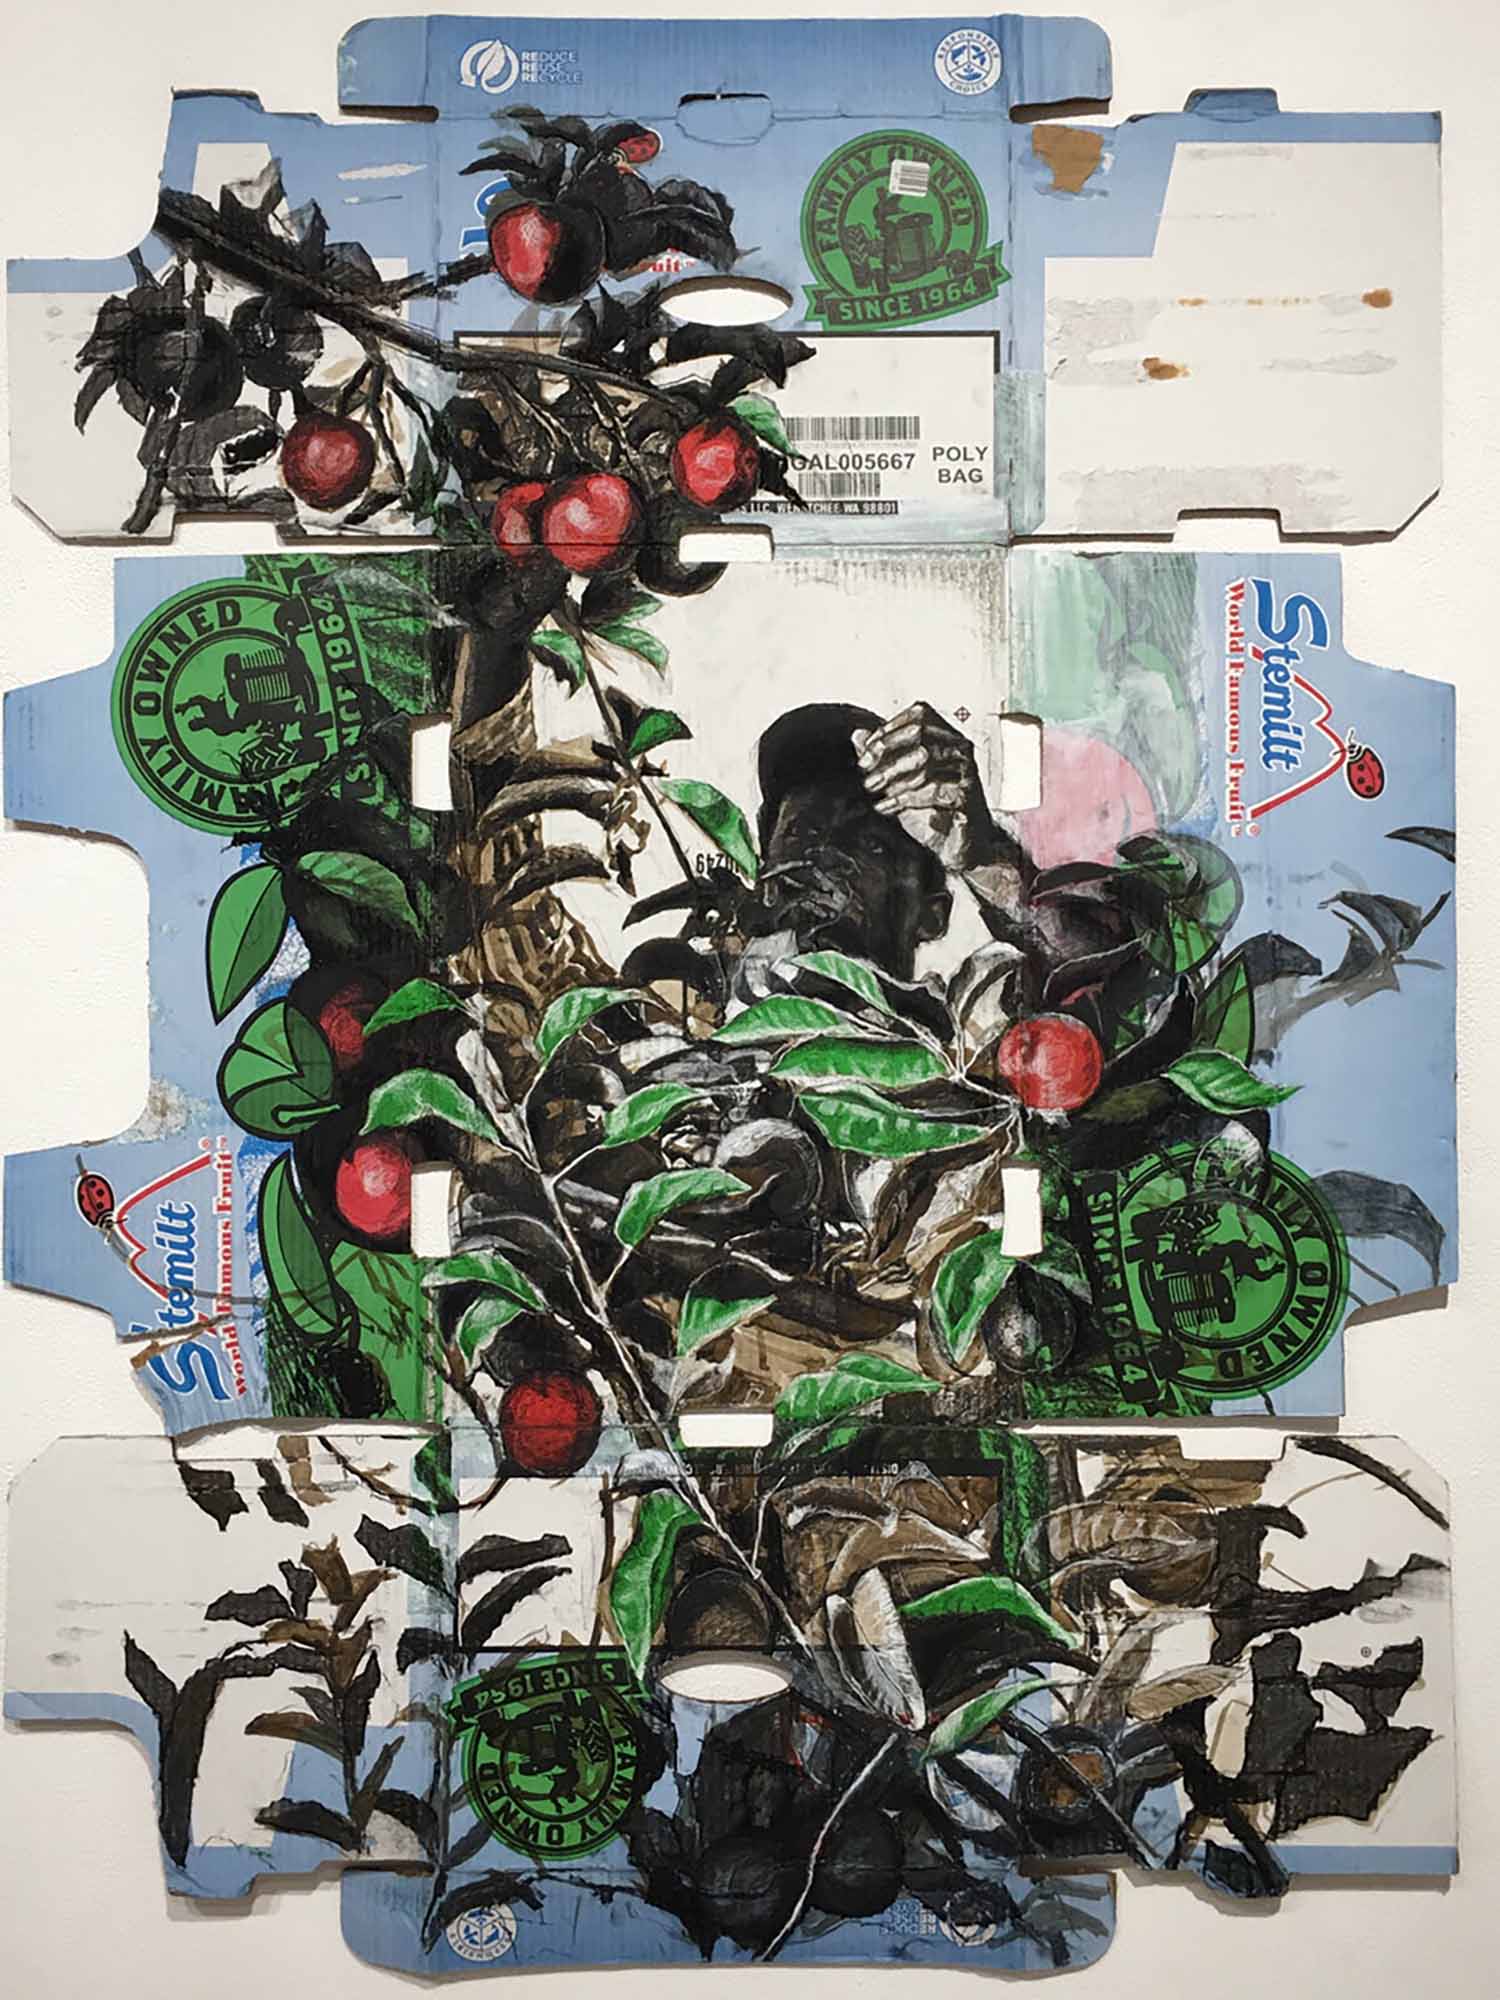 Fujisaki III
2016
Ink, Charcoal, and Oil on Unfolded Produce Box
50.5 x 37.5 Inches